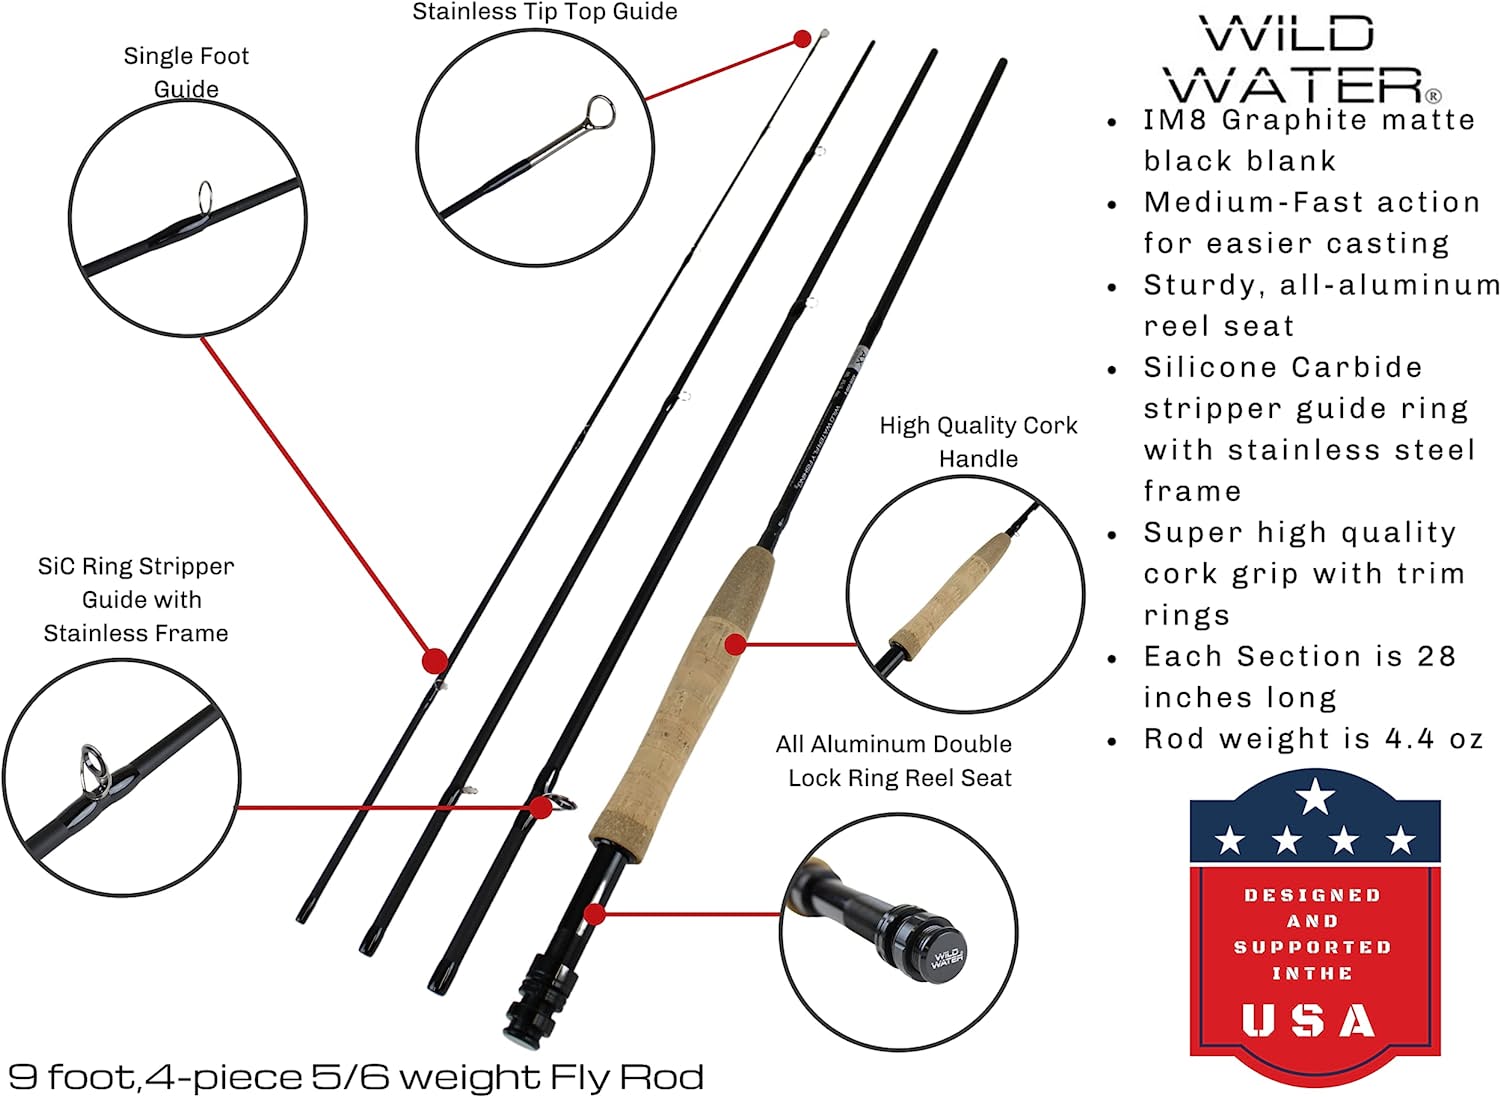 5/6 weight fly rod